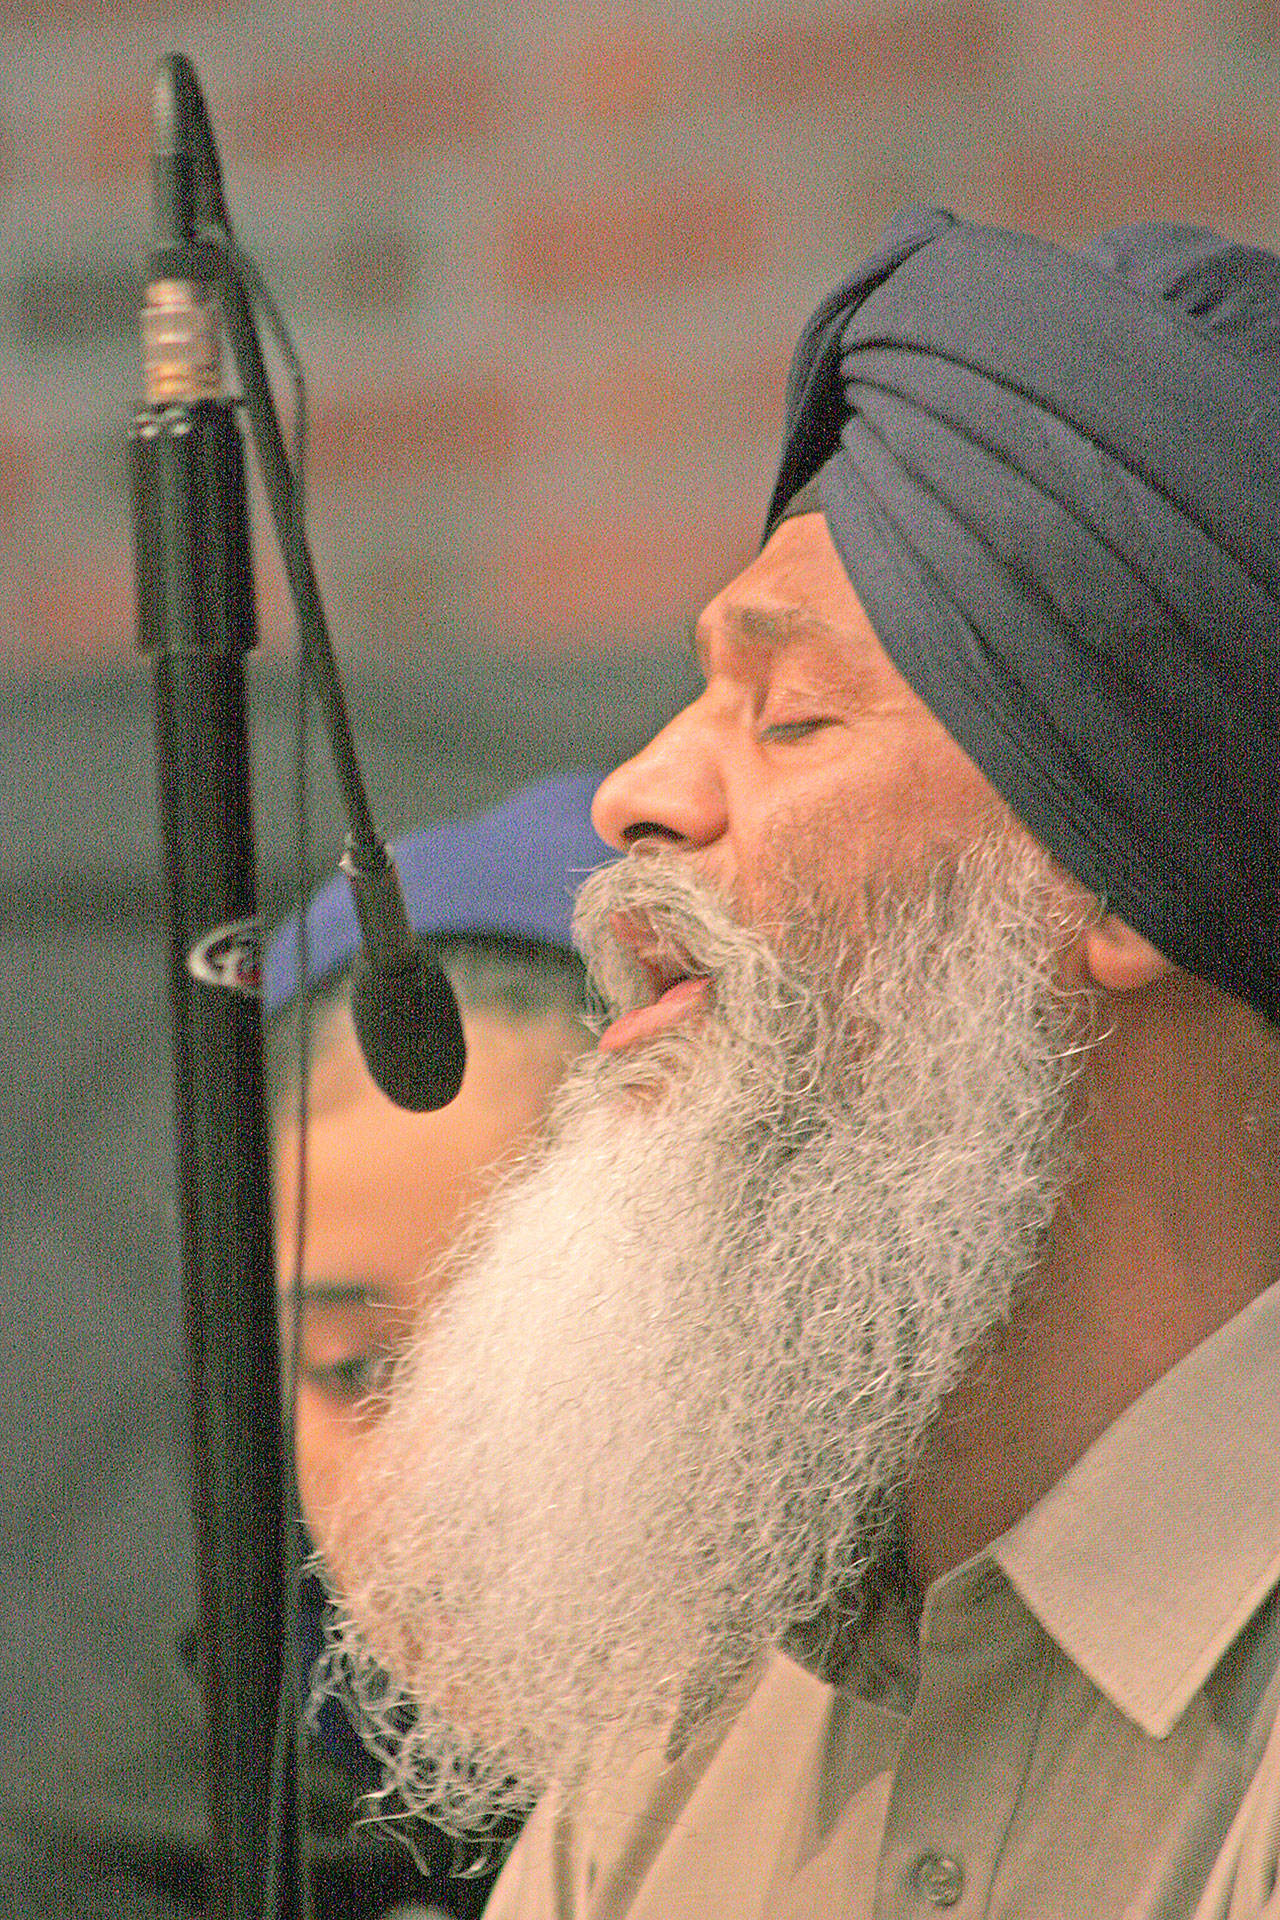 Bhai Mann Singh performs a ceremonial song during the community rally at Kent Lutheran Church on Saturday. MARK KLAAS, Kent Reporter